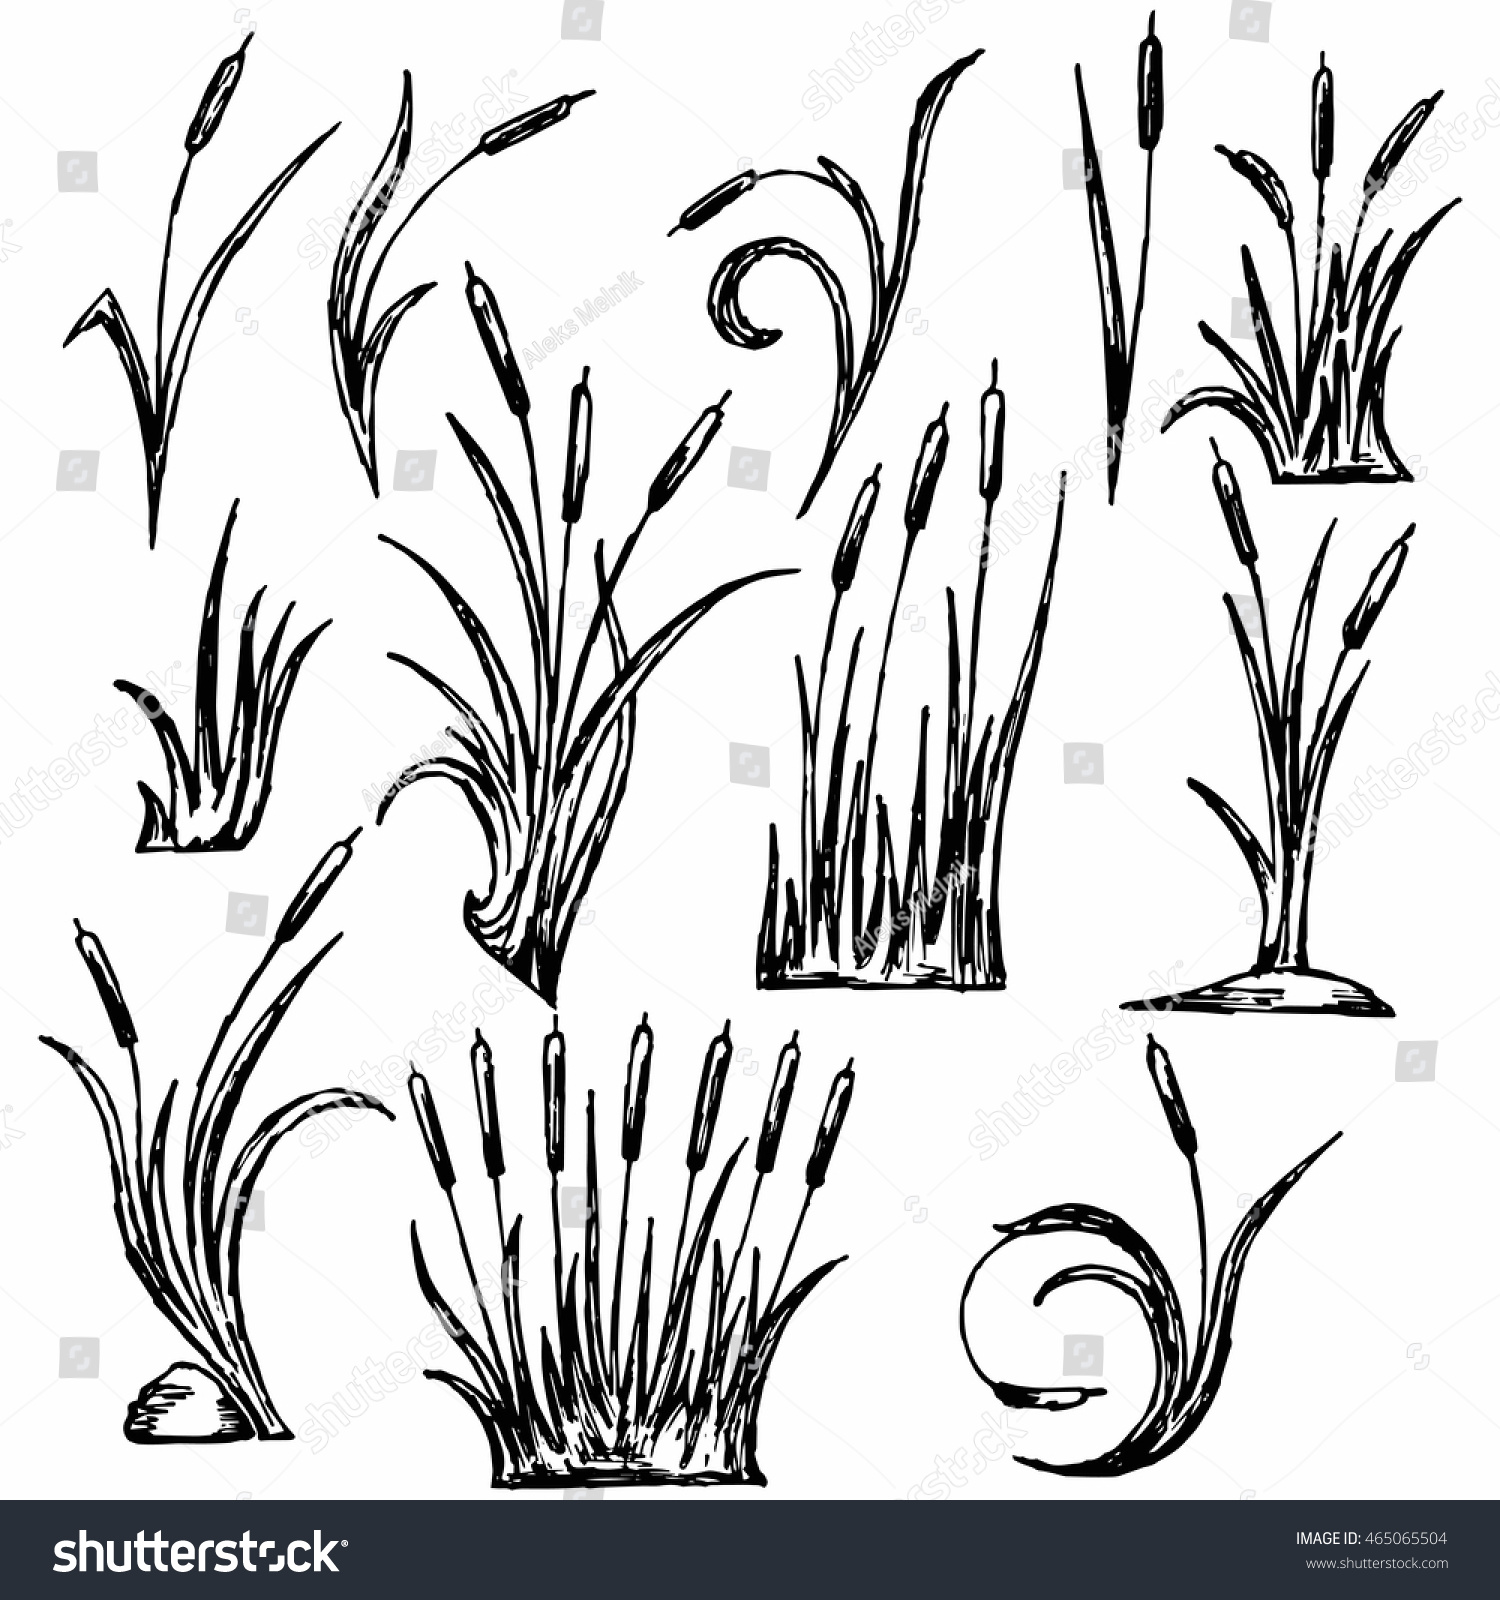 Reeds Marsh Grass Vector Image Stock Vector (Royalty Free) 465065504